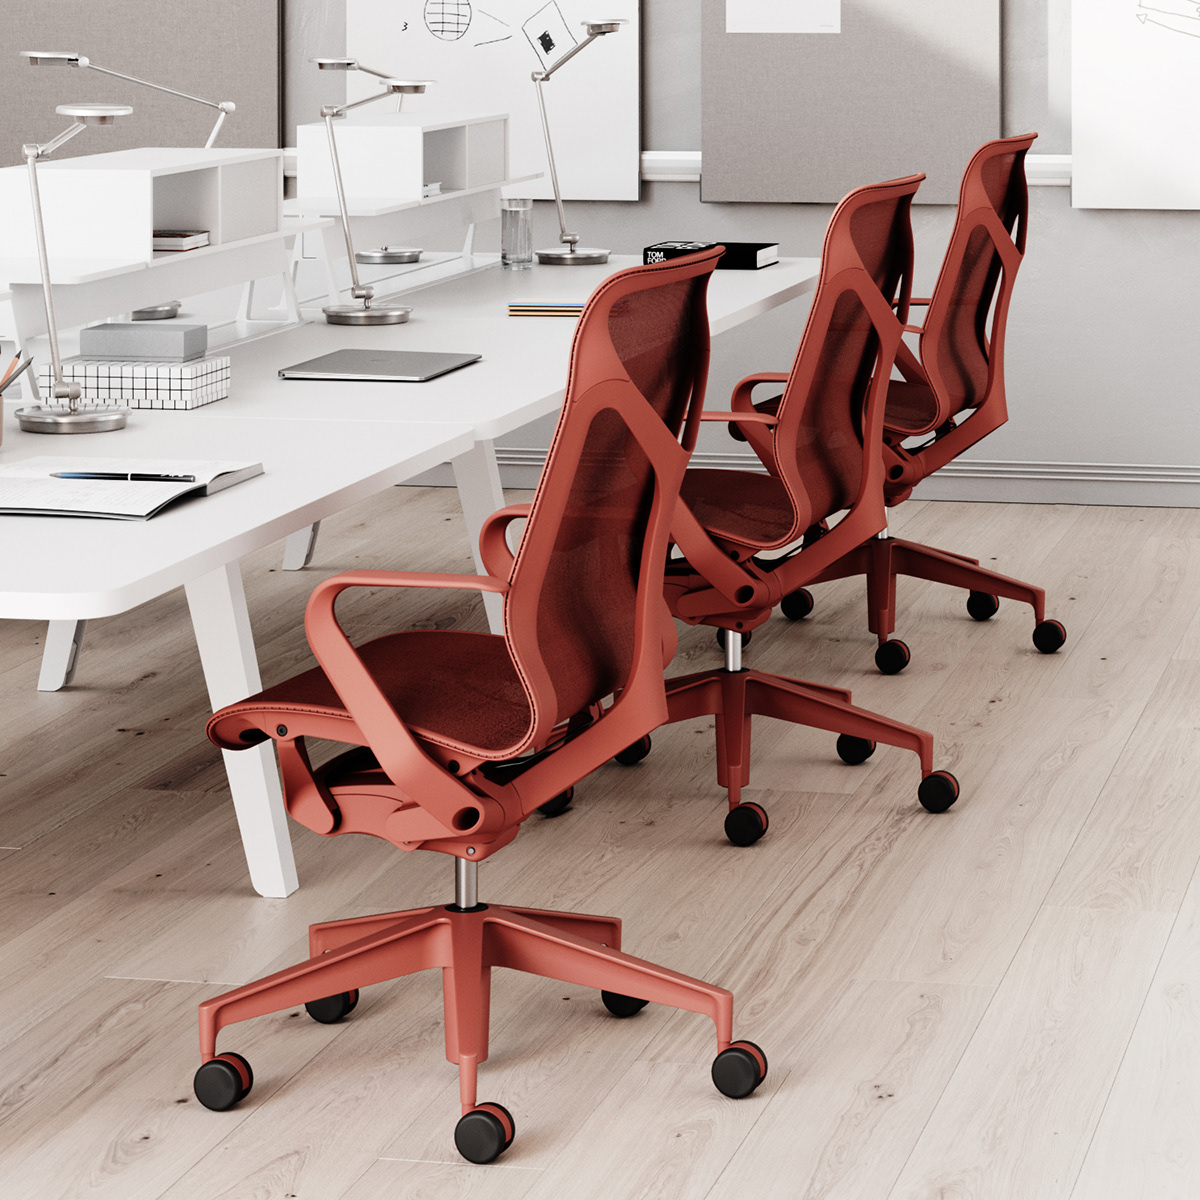 Red HermanMiller chairs in office